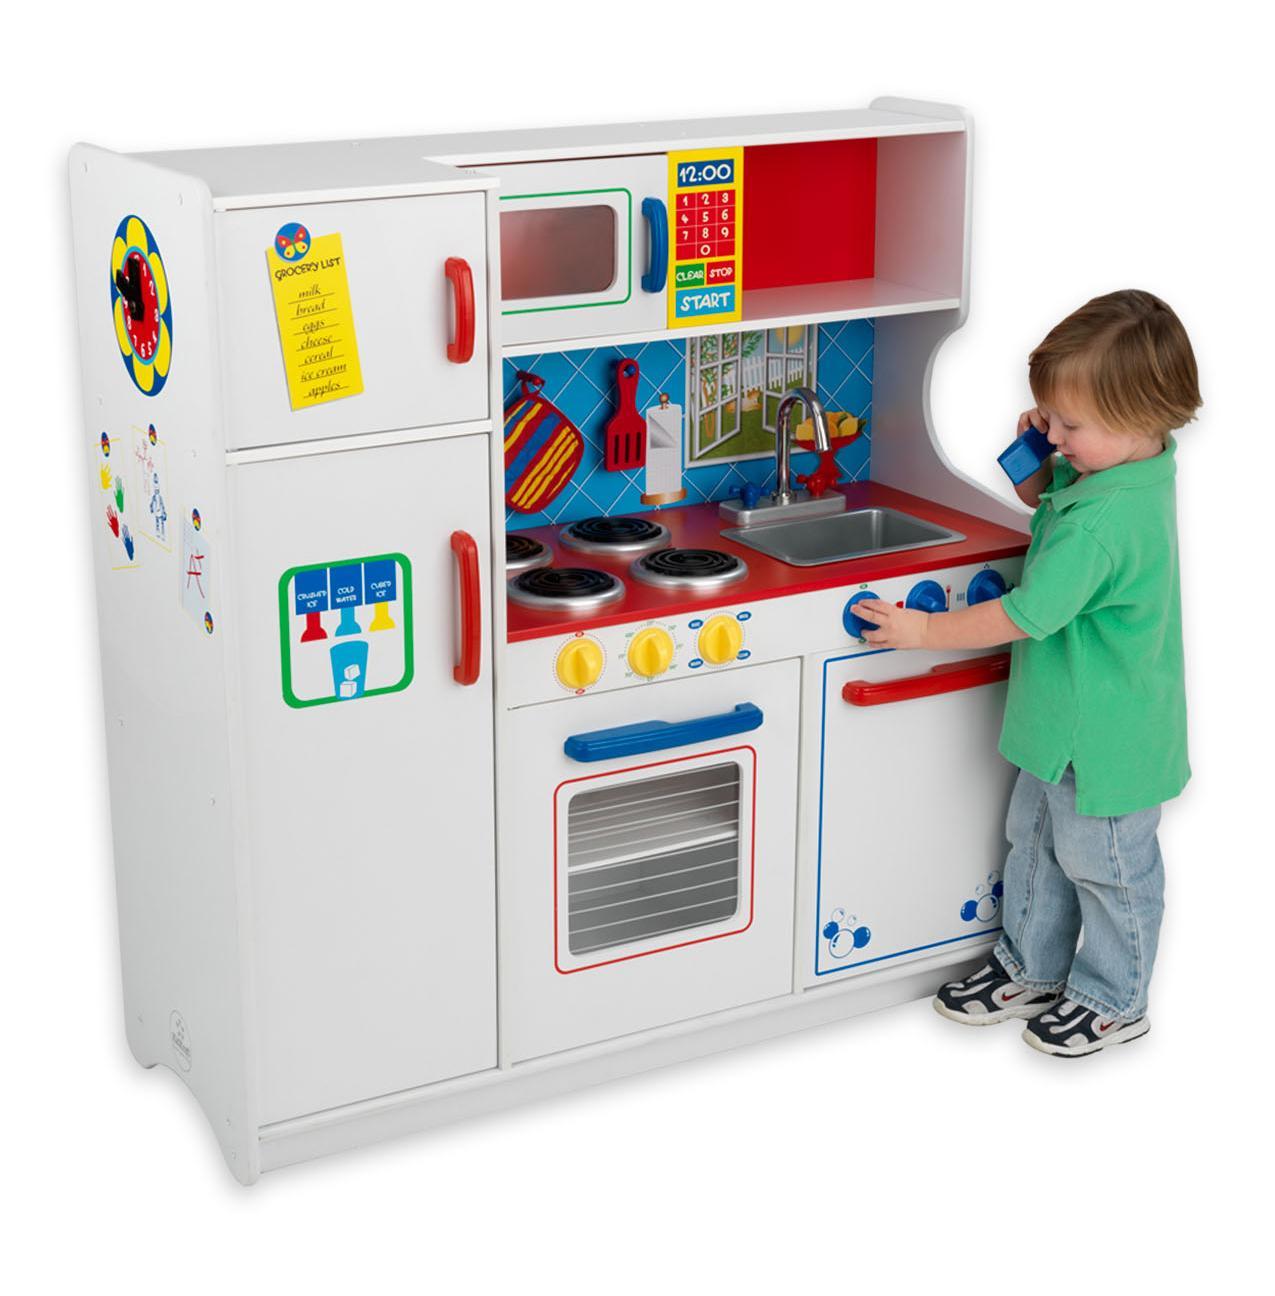 Step By Step Instructions To Choose A Pretend Play Kitchen